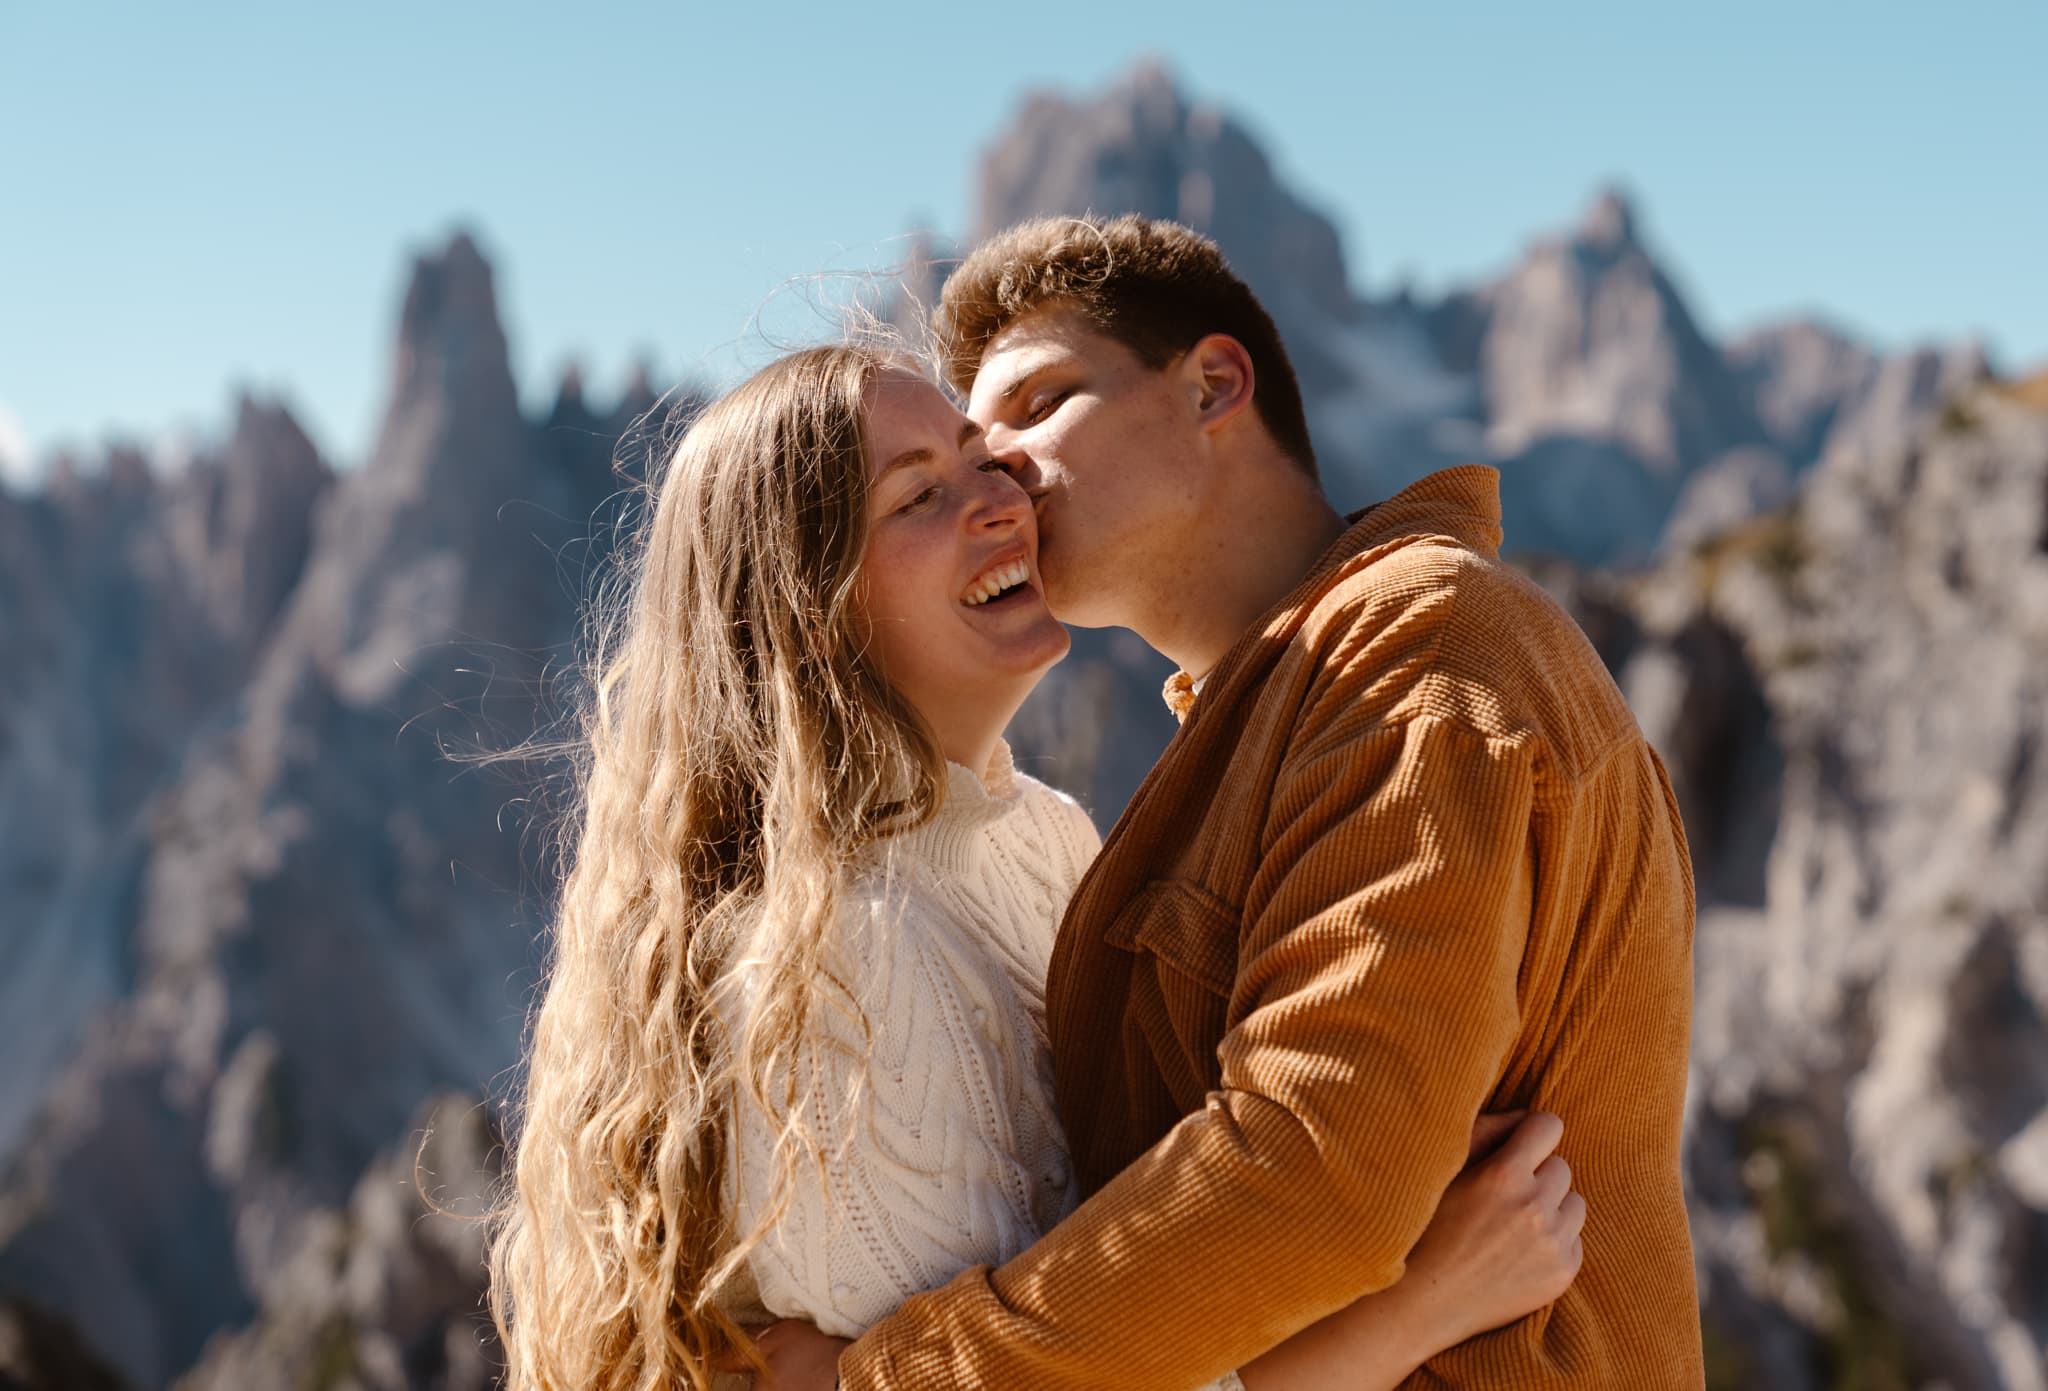 Boyfriend kissing girlfriend on the cheek with mountains in the background. Girlfriend is laughing.